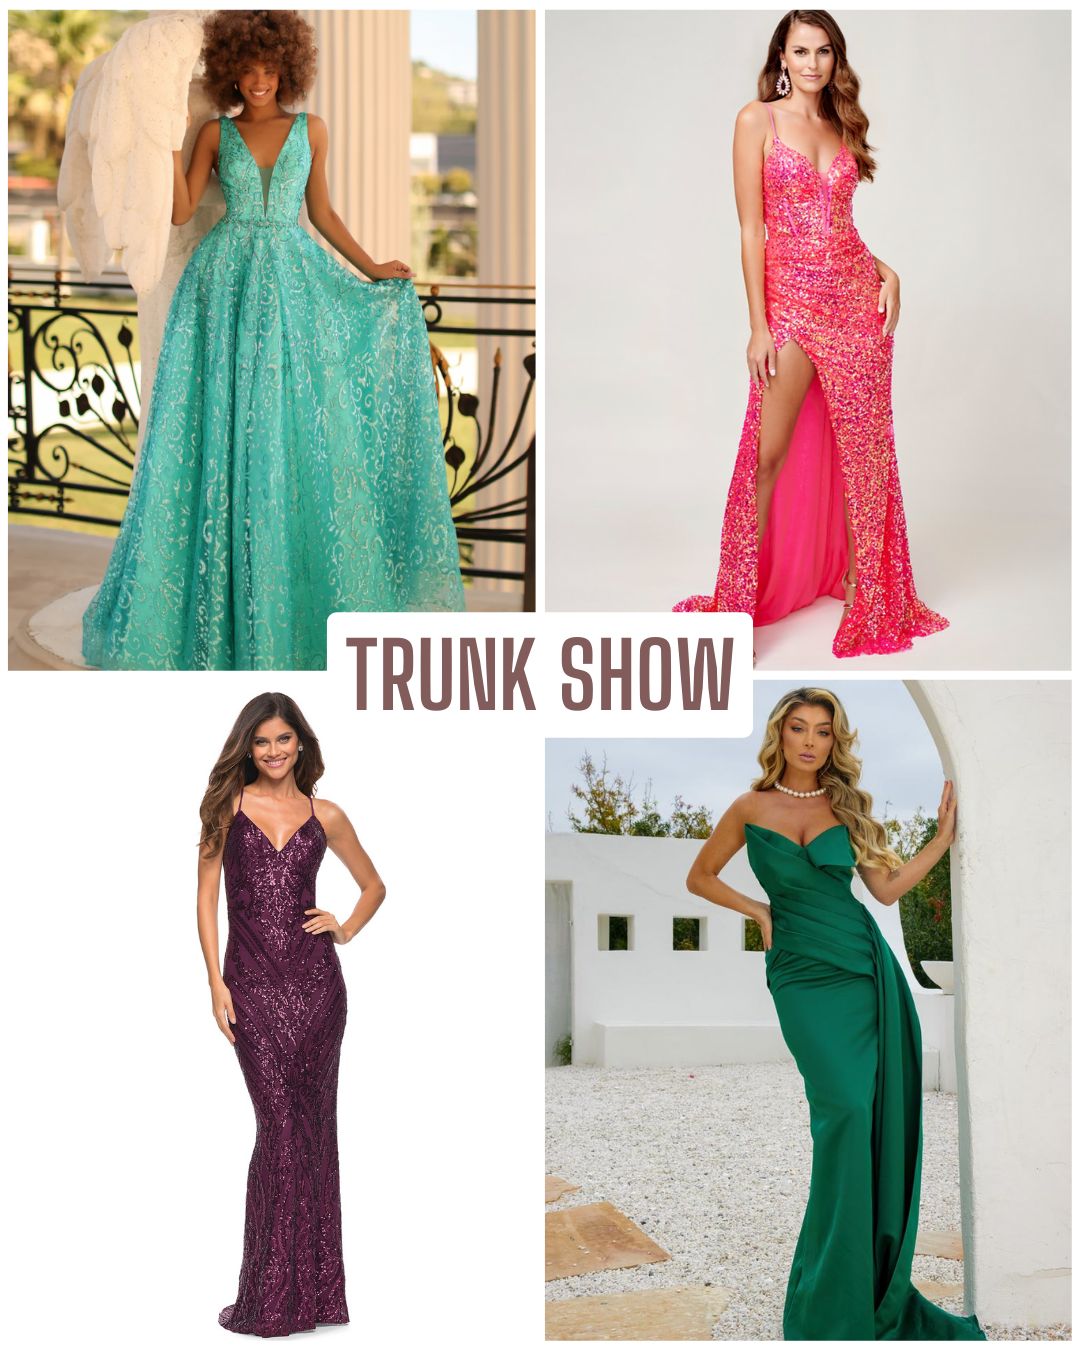 Trunk Shows!